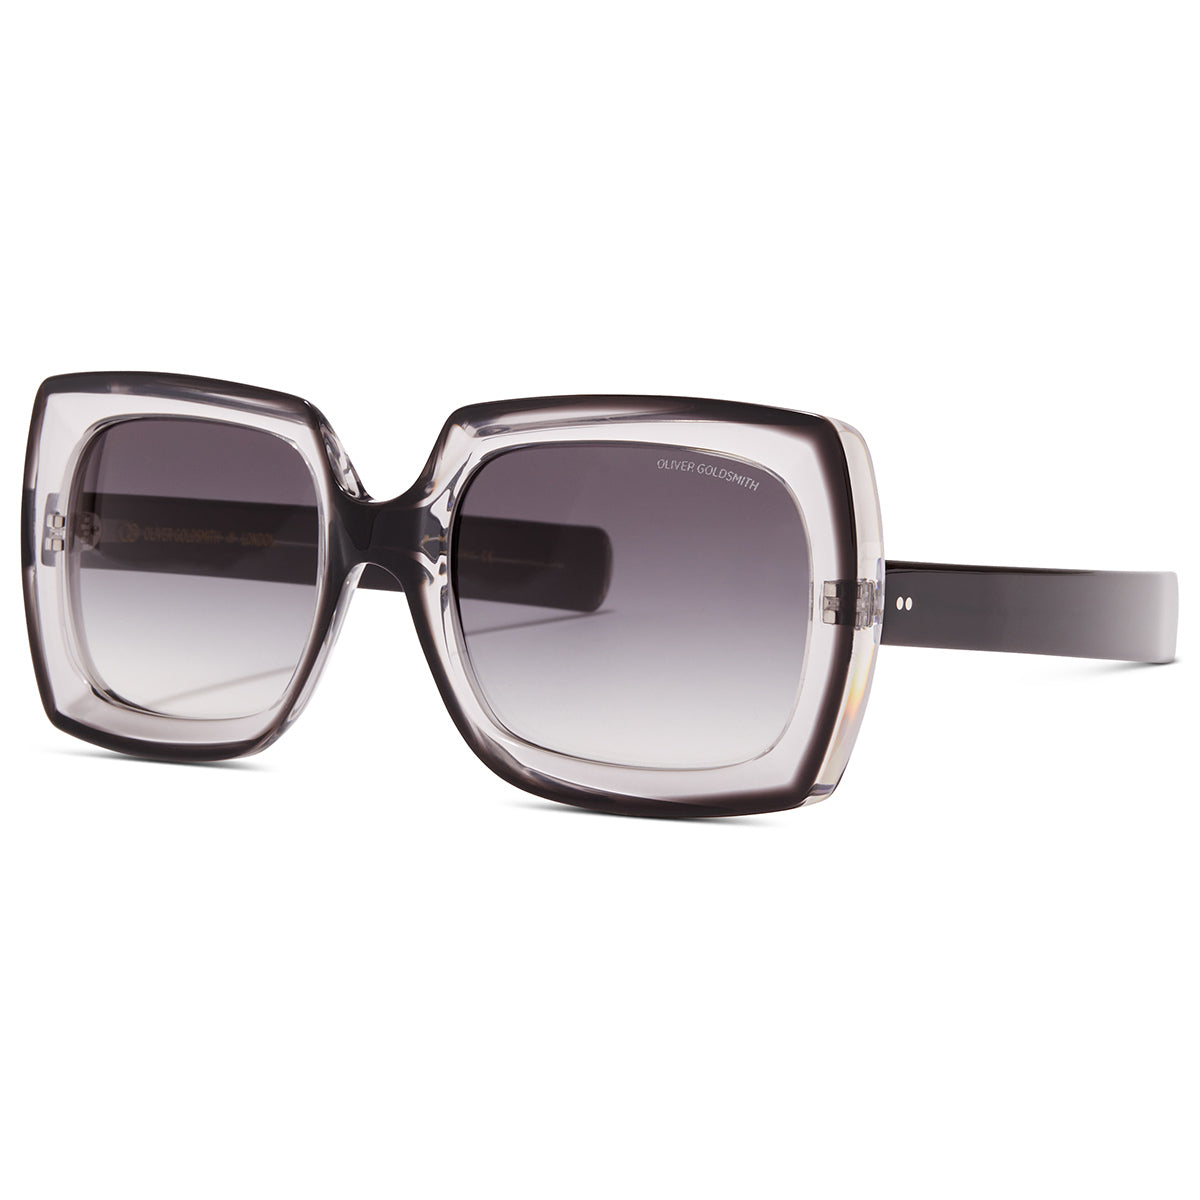 Oliver Goldsmith Sunglasses worn by Holly Golightly (Audrey Hepburn) in  Breakfast at Tiffany's